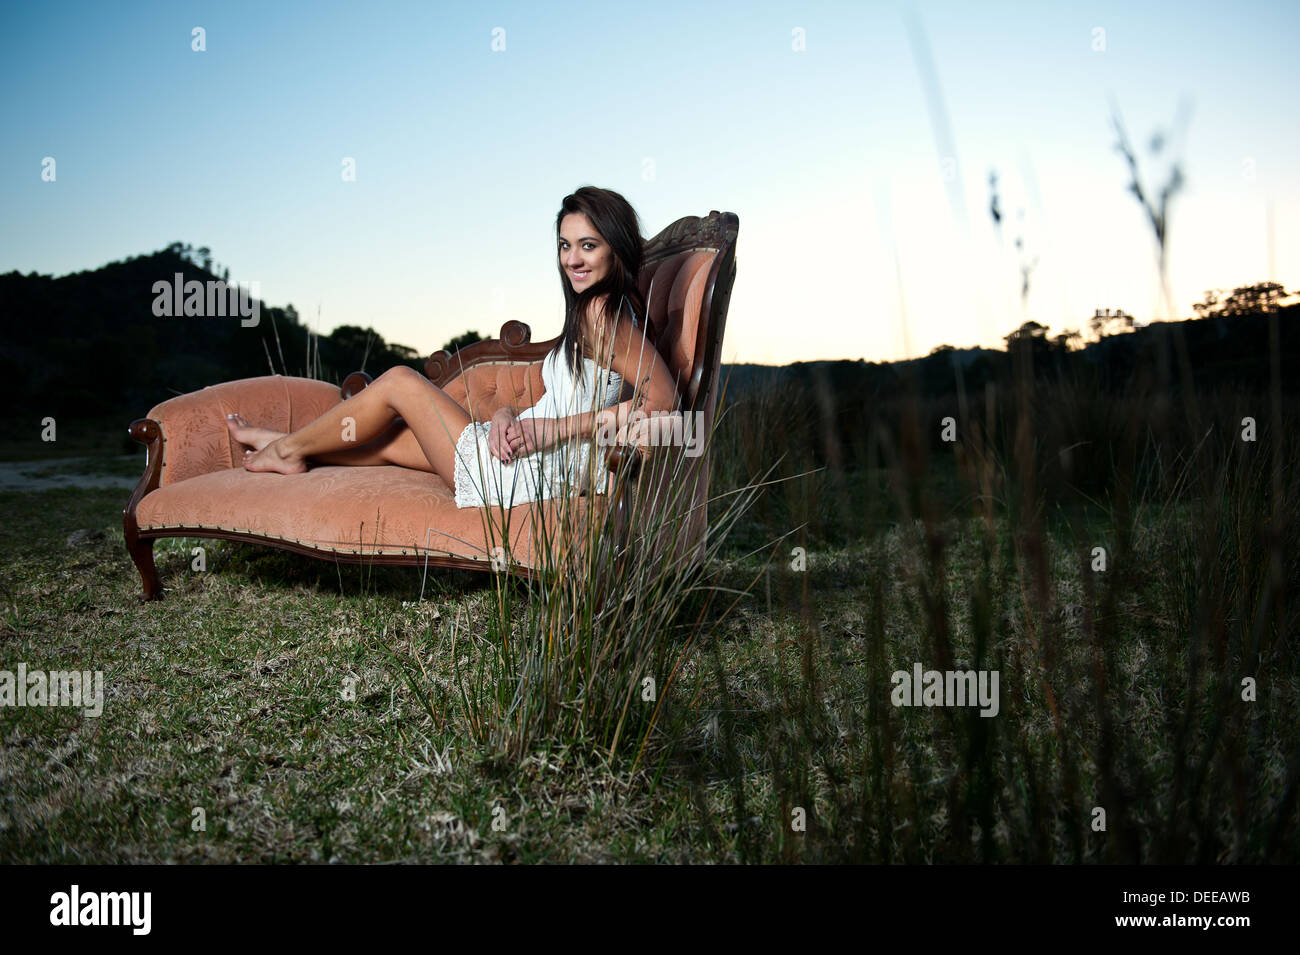 Attractive young Caucasian female model posing on a beautiful vintage couch outside a remote natural environment during sunset. Stock Photo